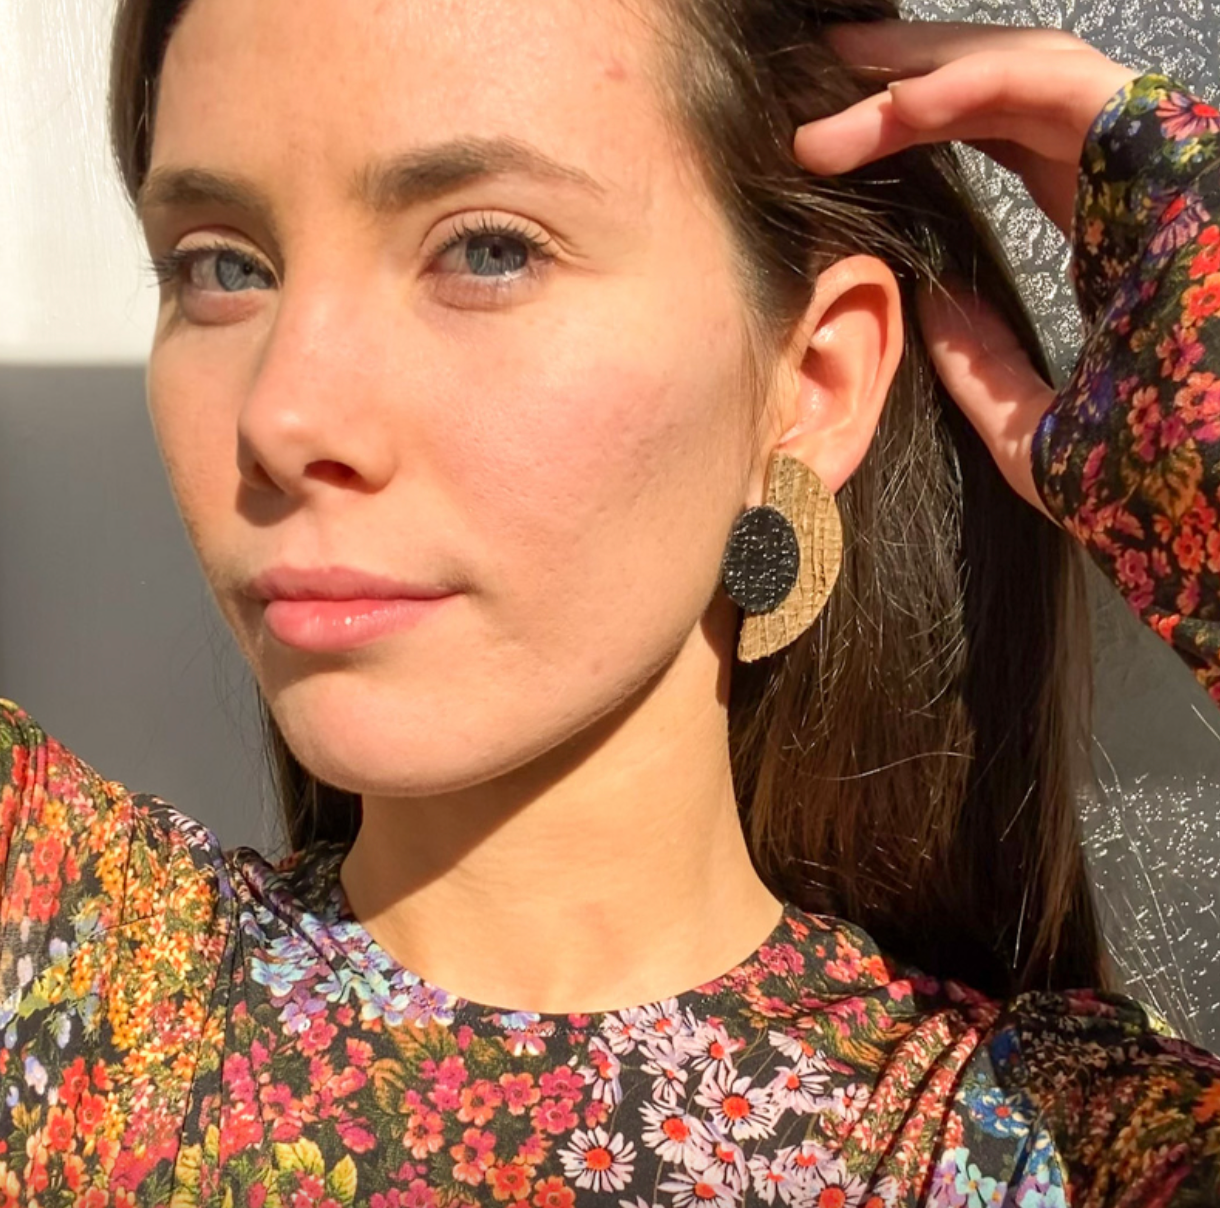 Black Half Moon Earrings: Stylish and Statement Earrings Made from Banana Fibre